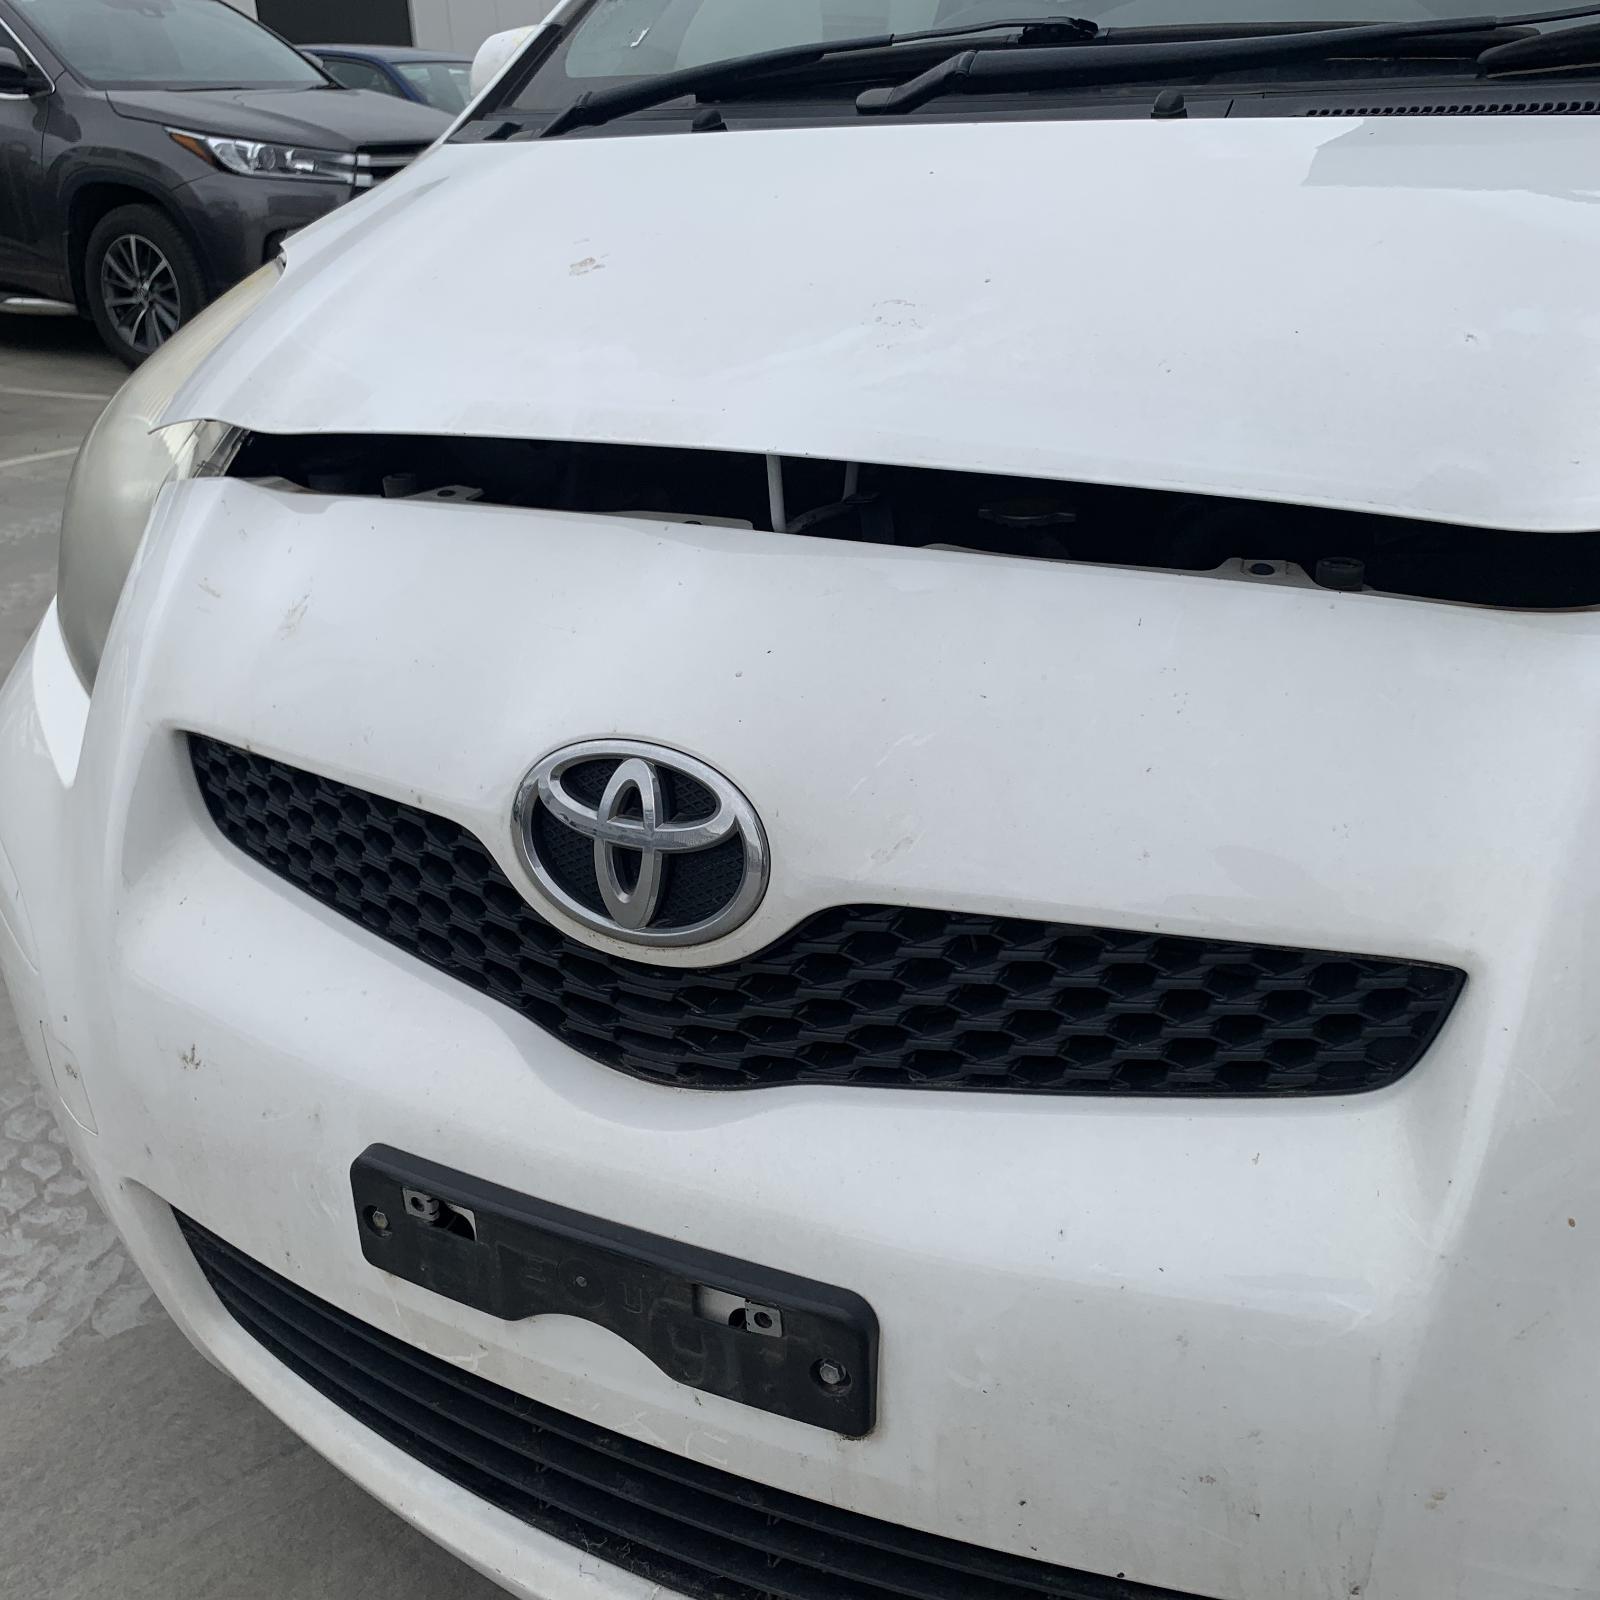 TOYOTA YARIS, Grille, RADIATOR GRILLE, NCP9#, HATCH, 10/08-10/11